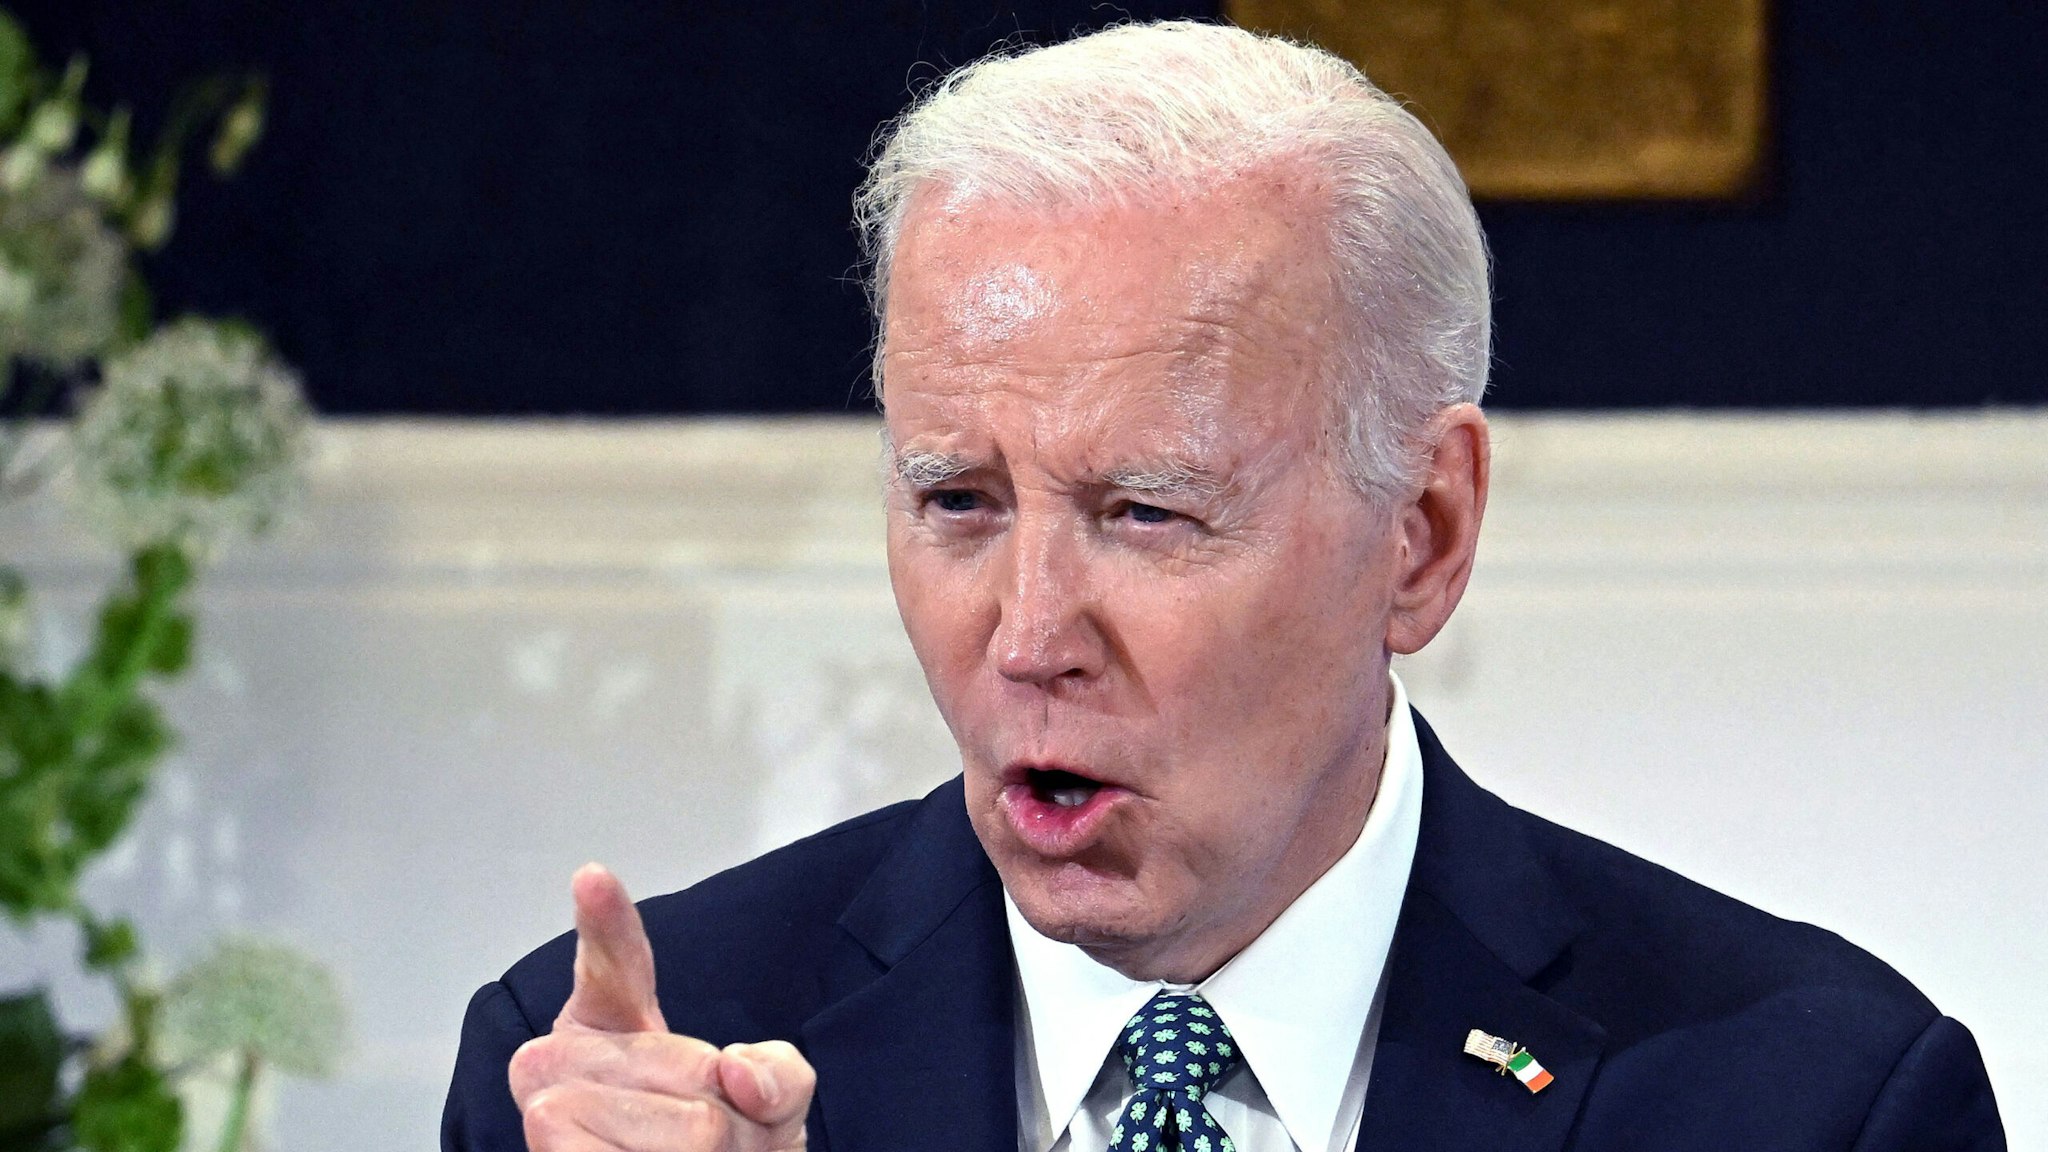 TOPSHOT - US President Joe Biden gestures as he speaks during a Banquet Dinner at Dublin Castle on April 13, 2023, during his four day trip to Northern Ireland and Ireland.